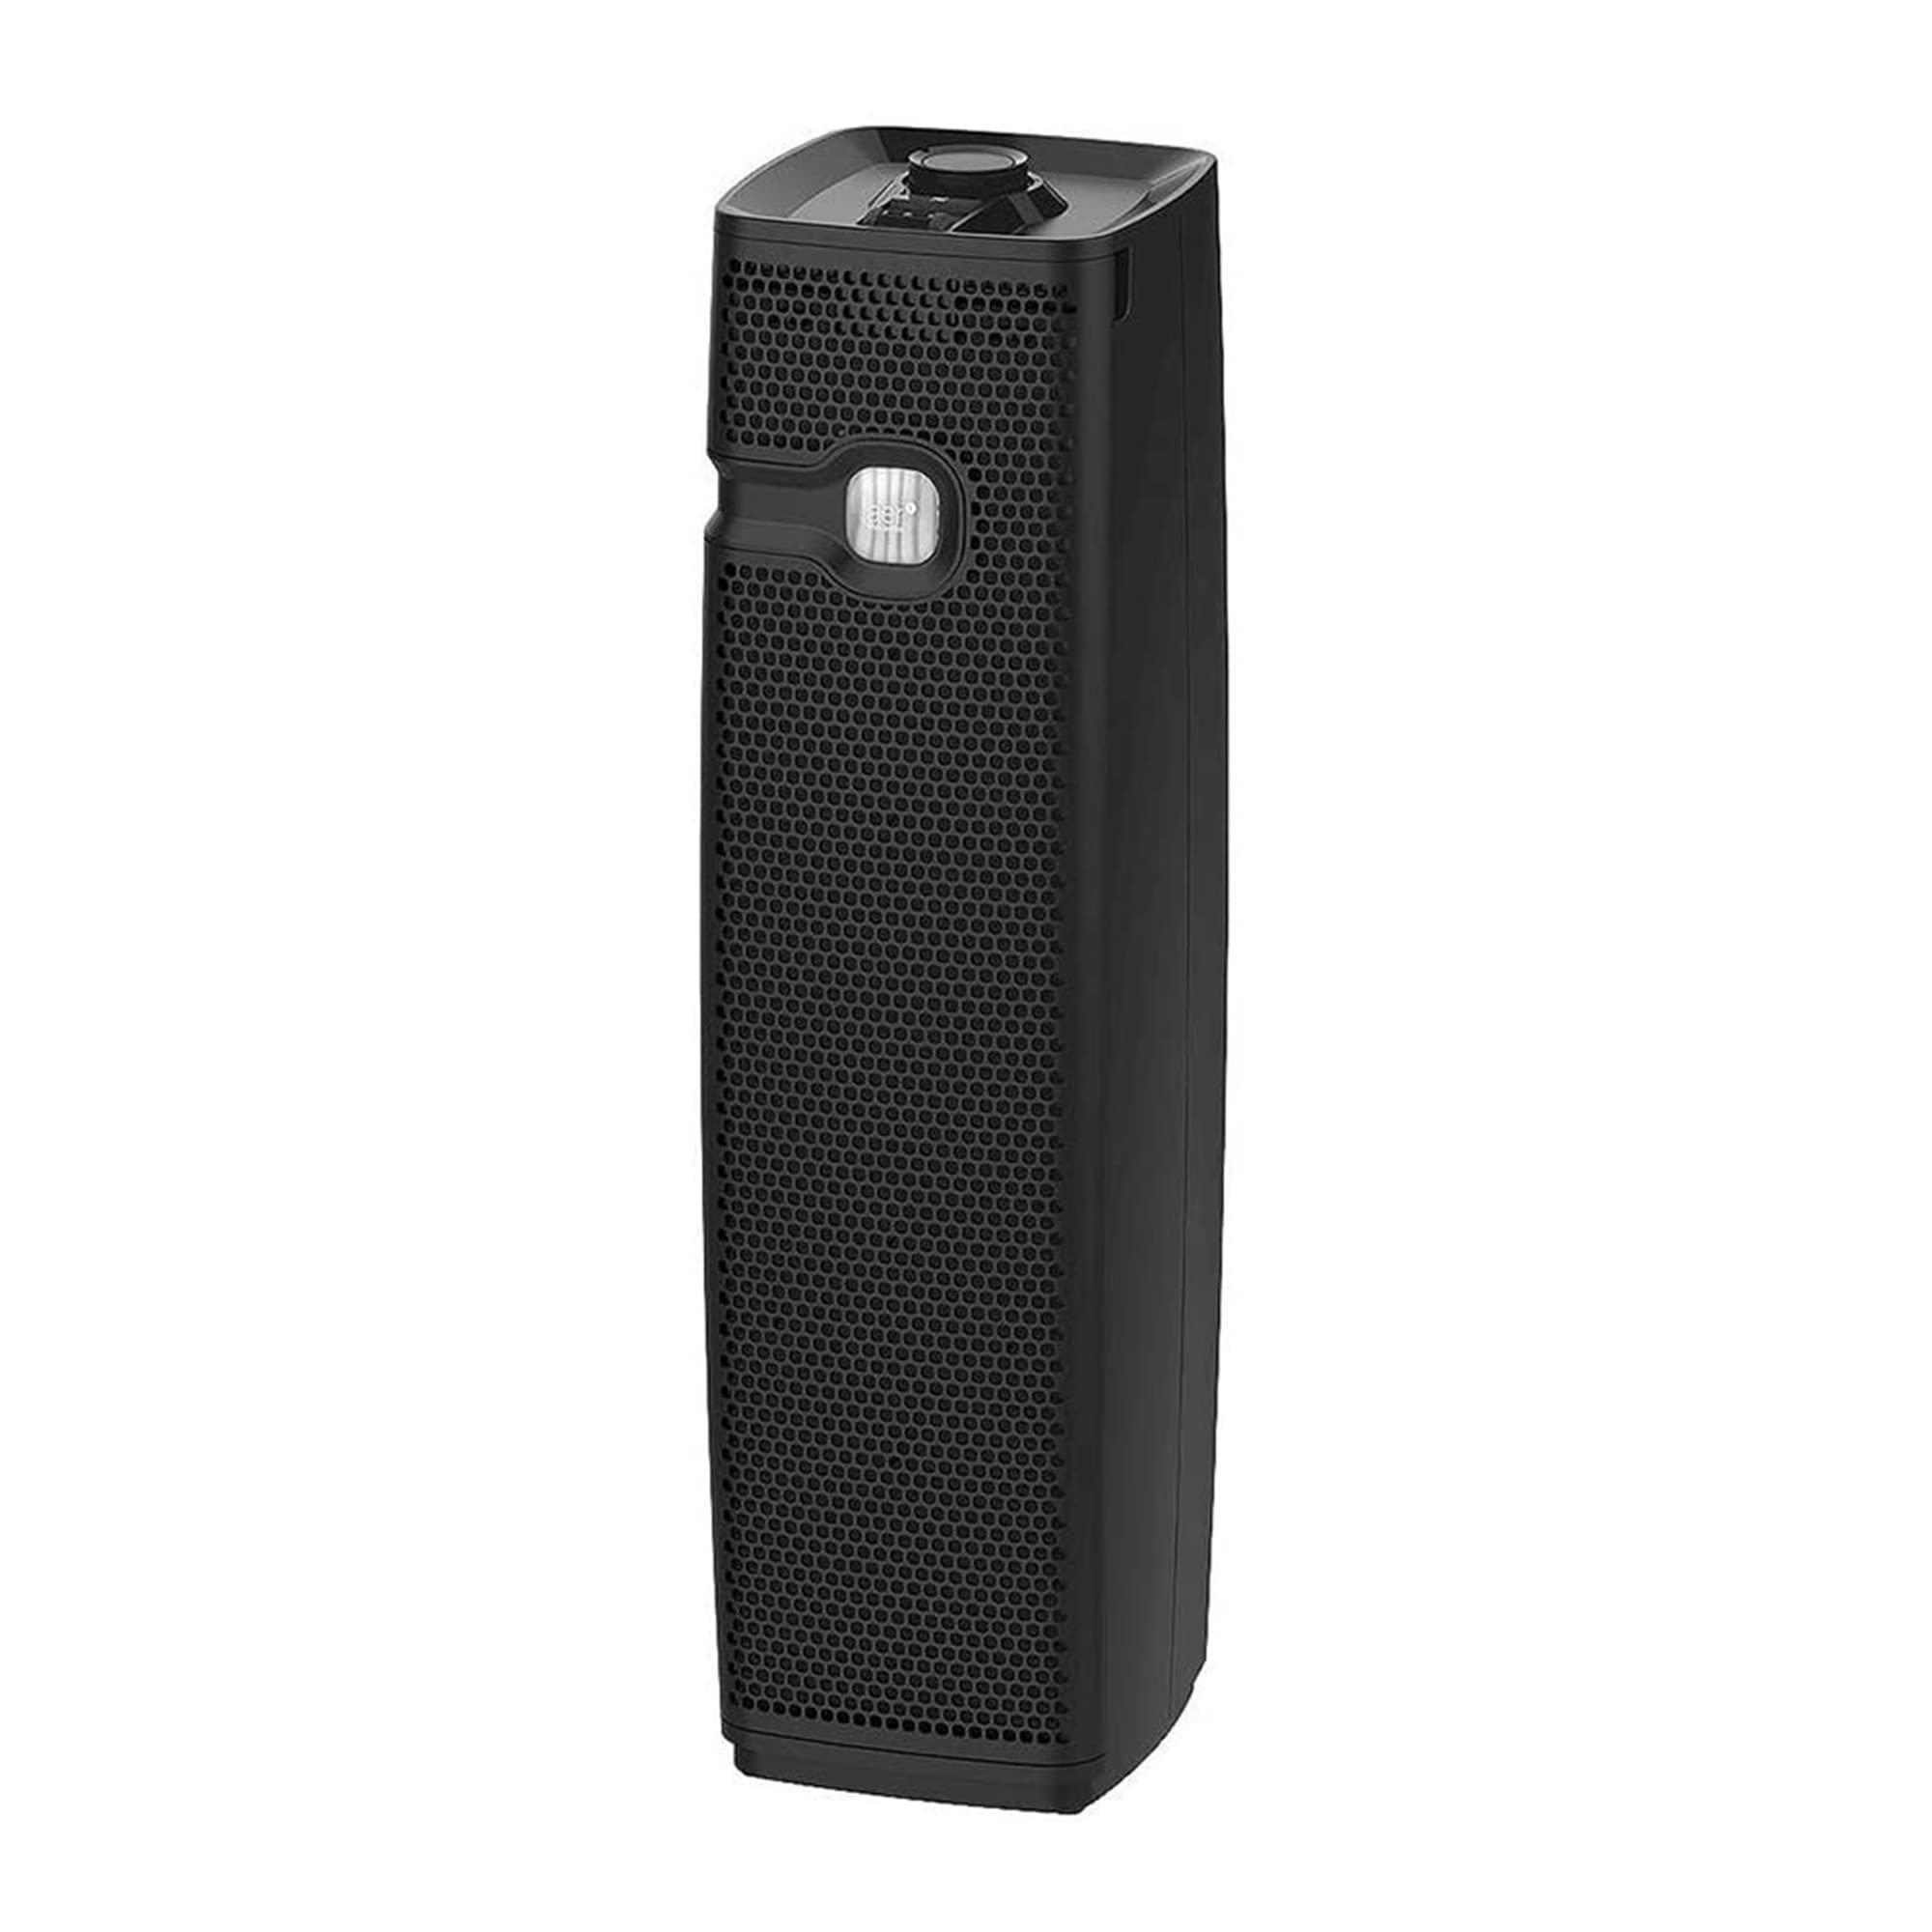 holmes hap9425b aer1 tower slim hepa air purifier with ionizer and visipure filter window and filter life indicator dial for 